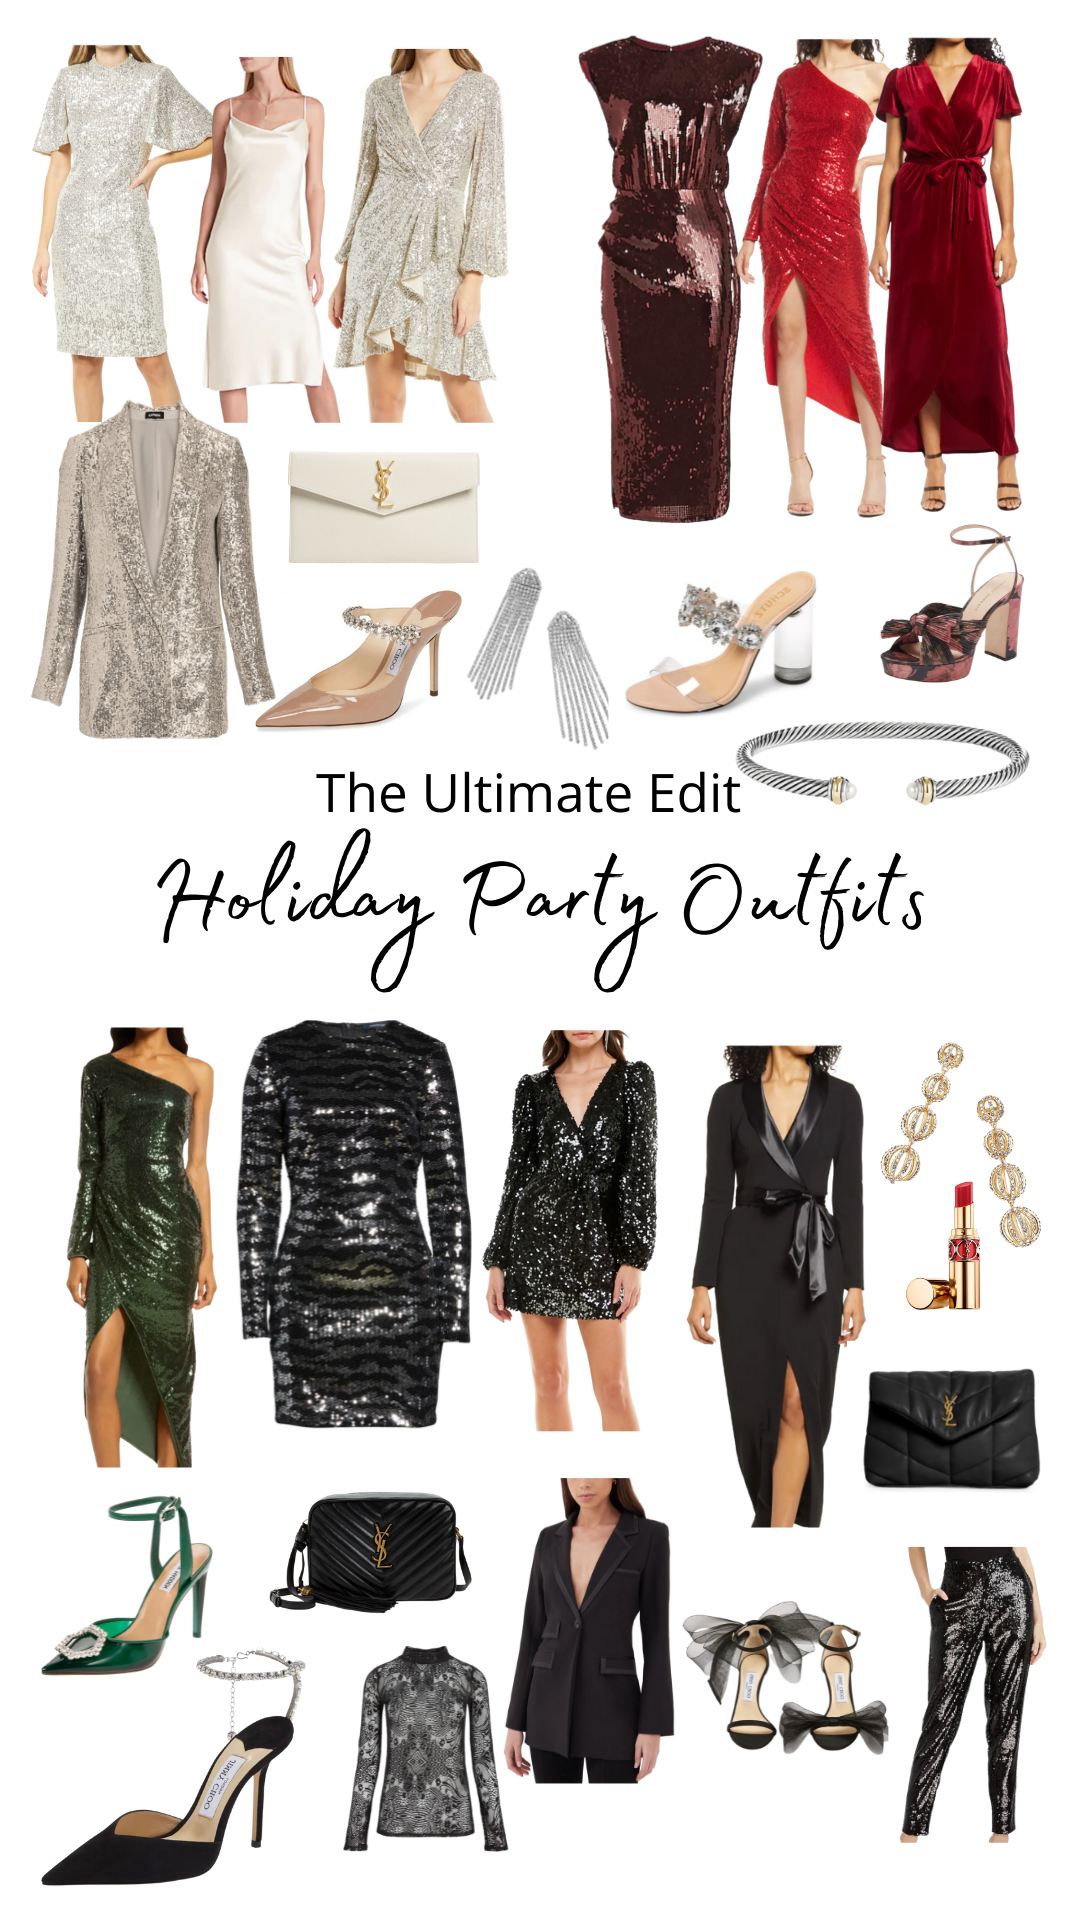 7 Elegant Party Outfits Ideas for Work and Holiday Events - goddessie